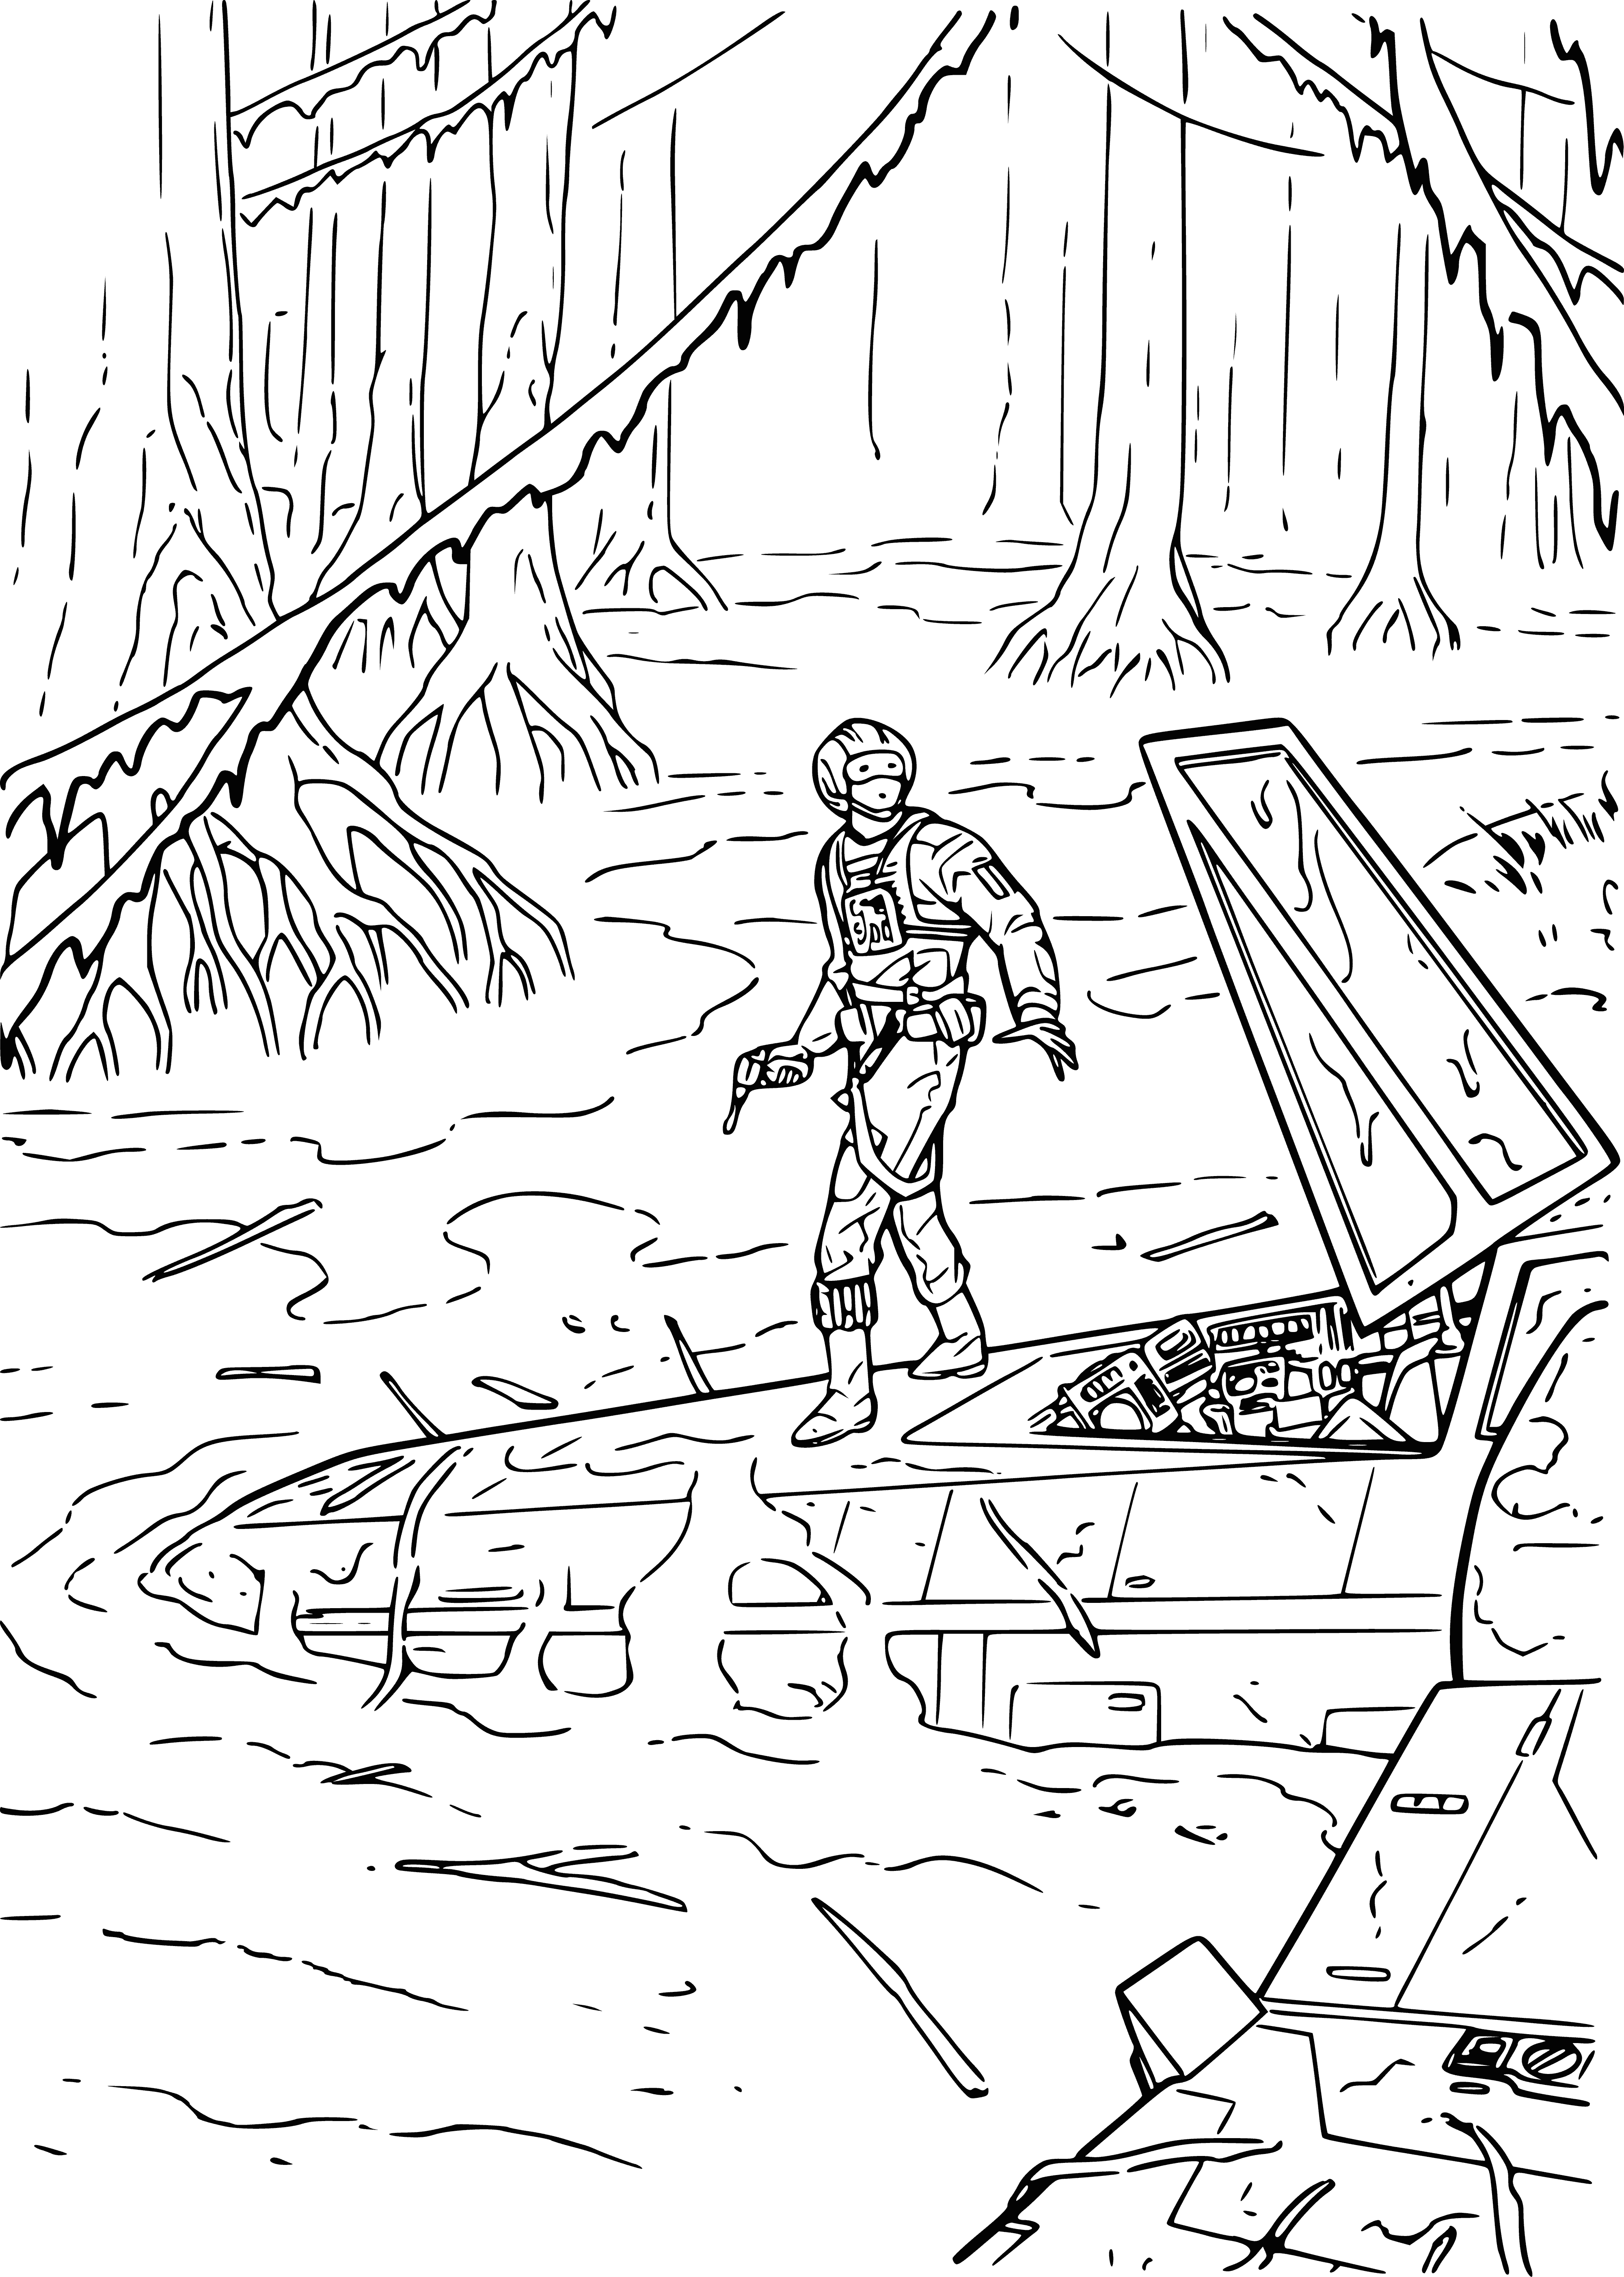 coloring page: Creature stands on desert planet with two suns, cloaked and holding a lightsaber.